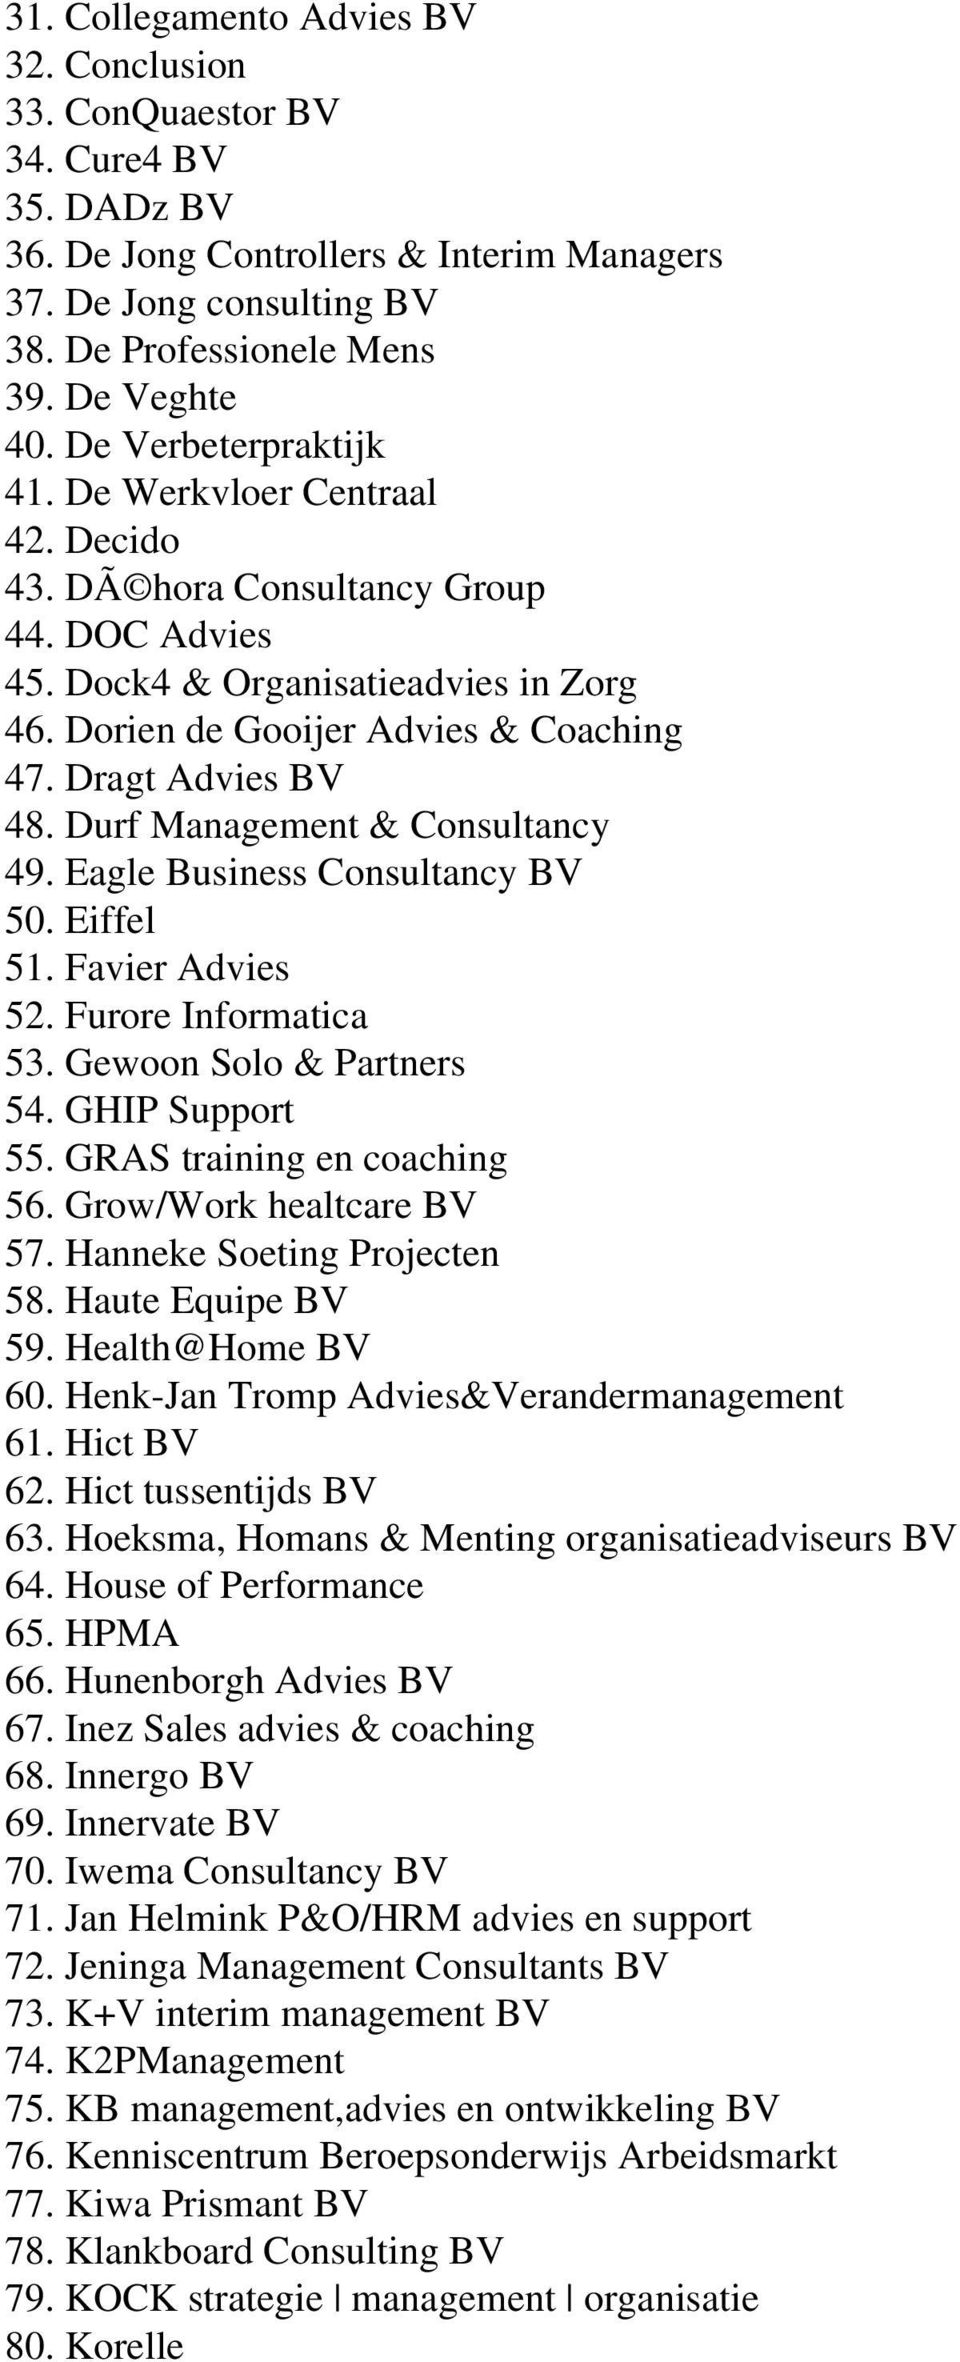 Dragt Advies BV 48. Durf Management & Consultancy 49. Eagle Business Consultancy BV 50. Eiffel 51. Favier Advies 52. Furore Informatica 53. Gewoon Solo & Partners 54. GHIP Support 55.